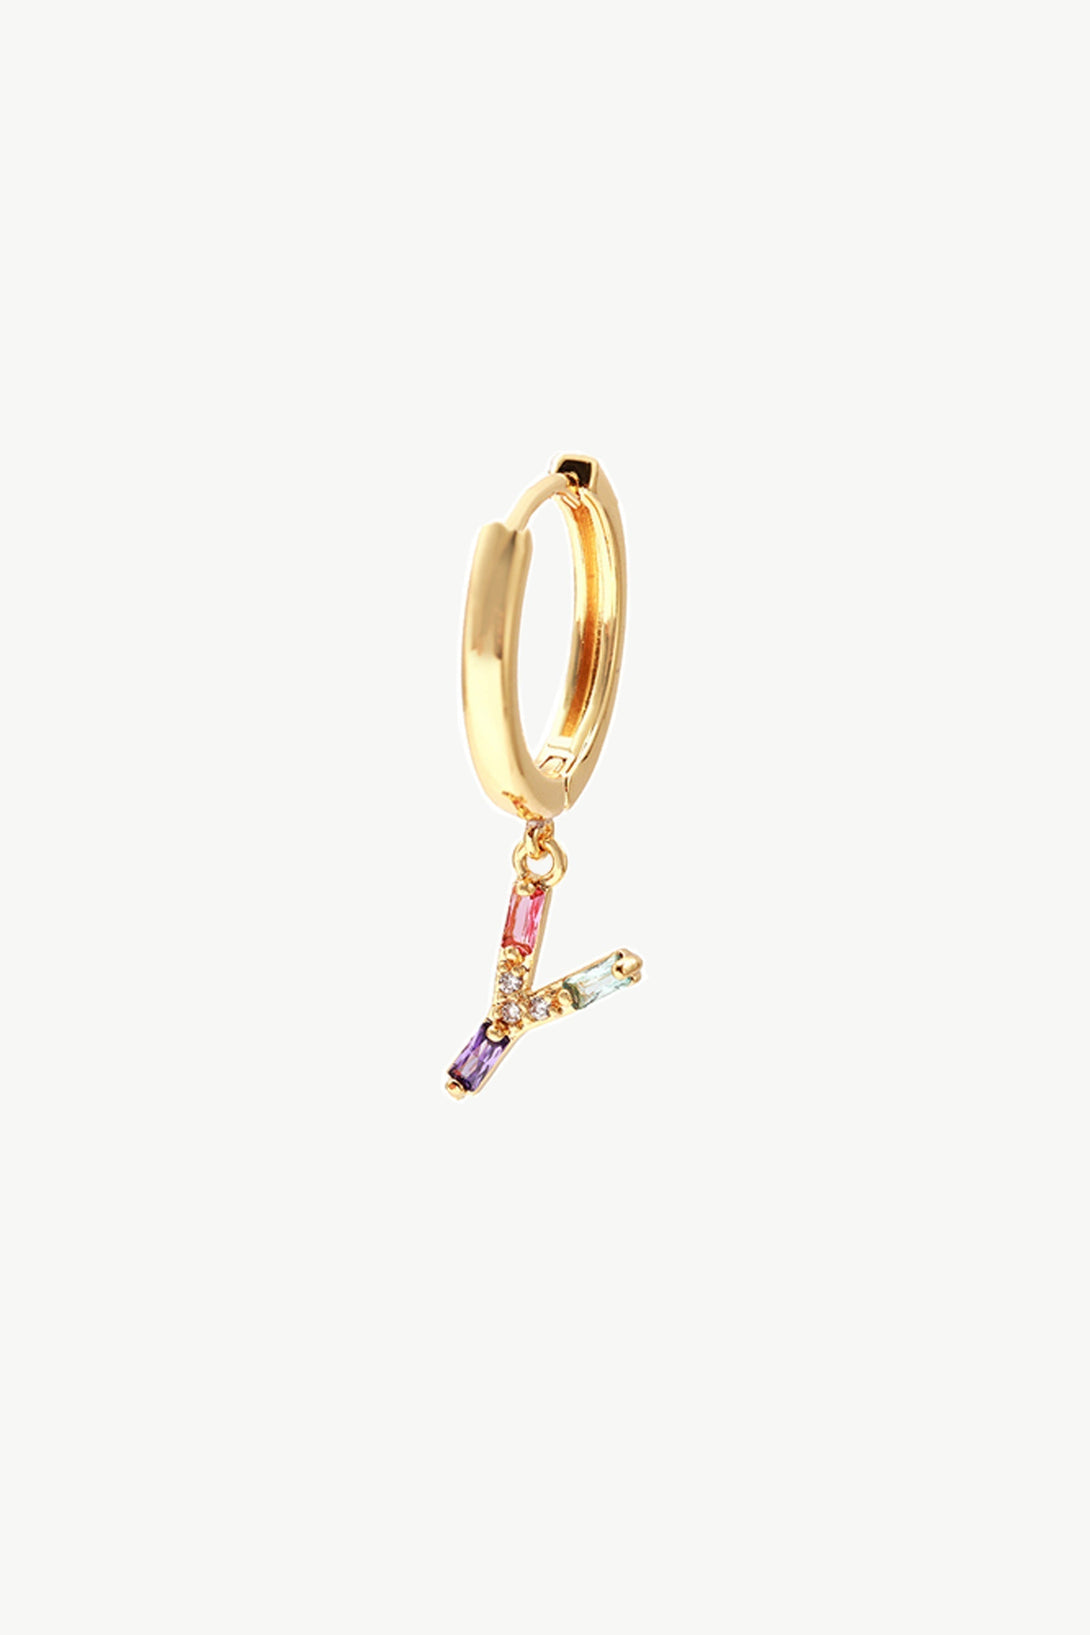 Single Gold Pavé Initial Charm Drop Huggie Hoop Earring-Letter Y - Classicharms